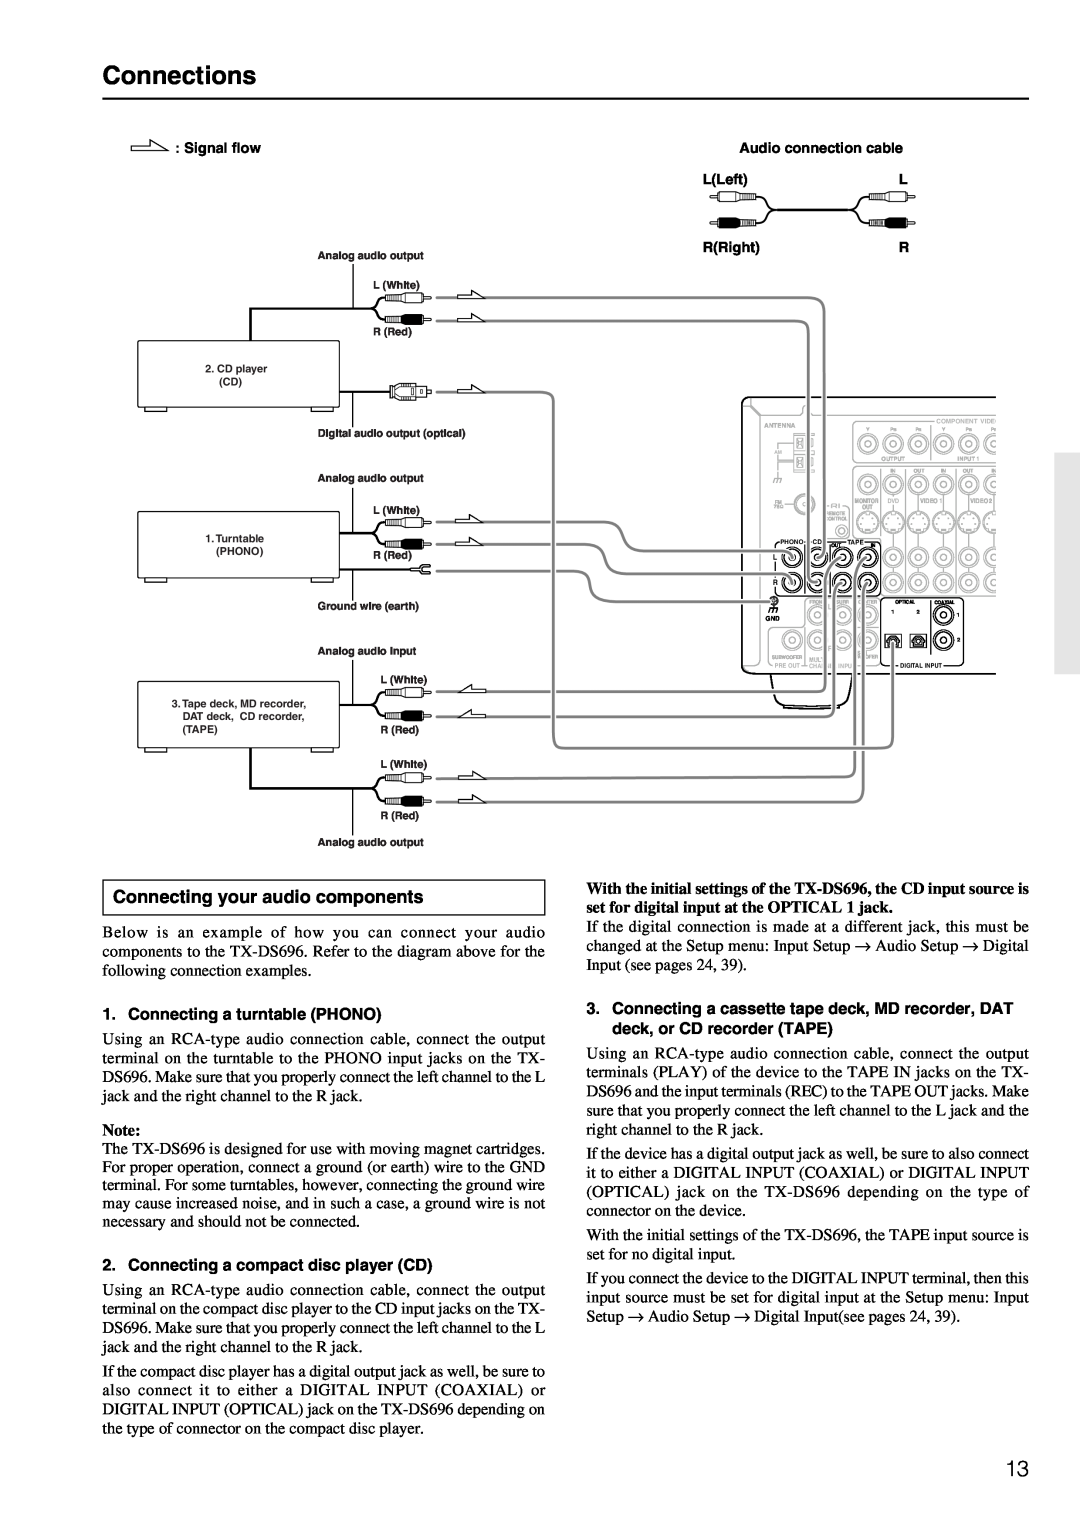 Onkyo TX-DS696 appendix Connections, Connecting your audio components 